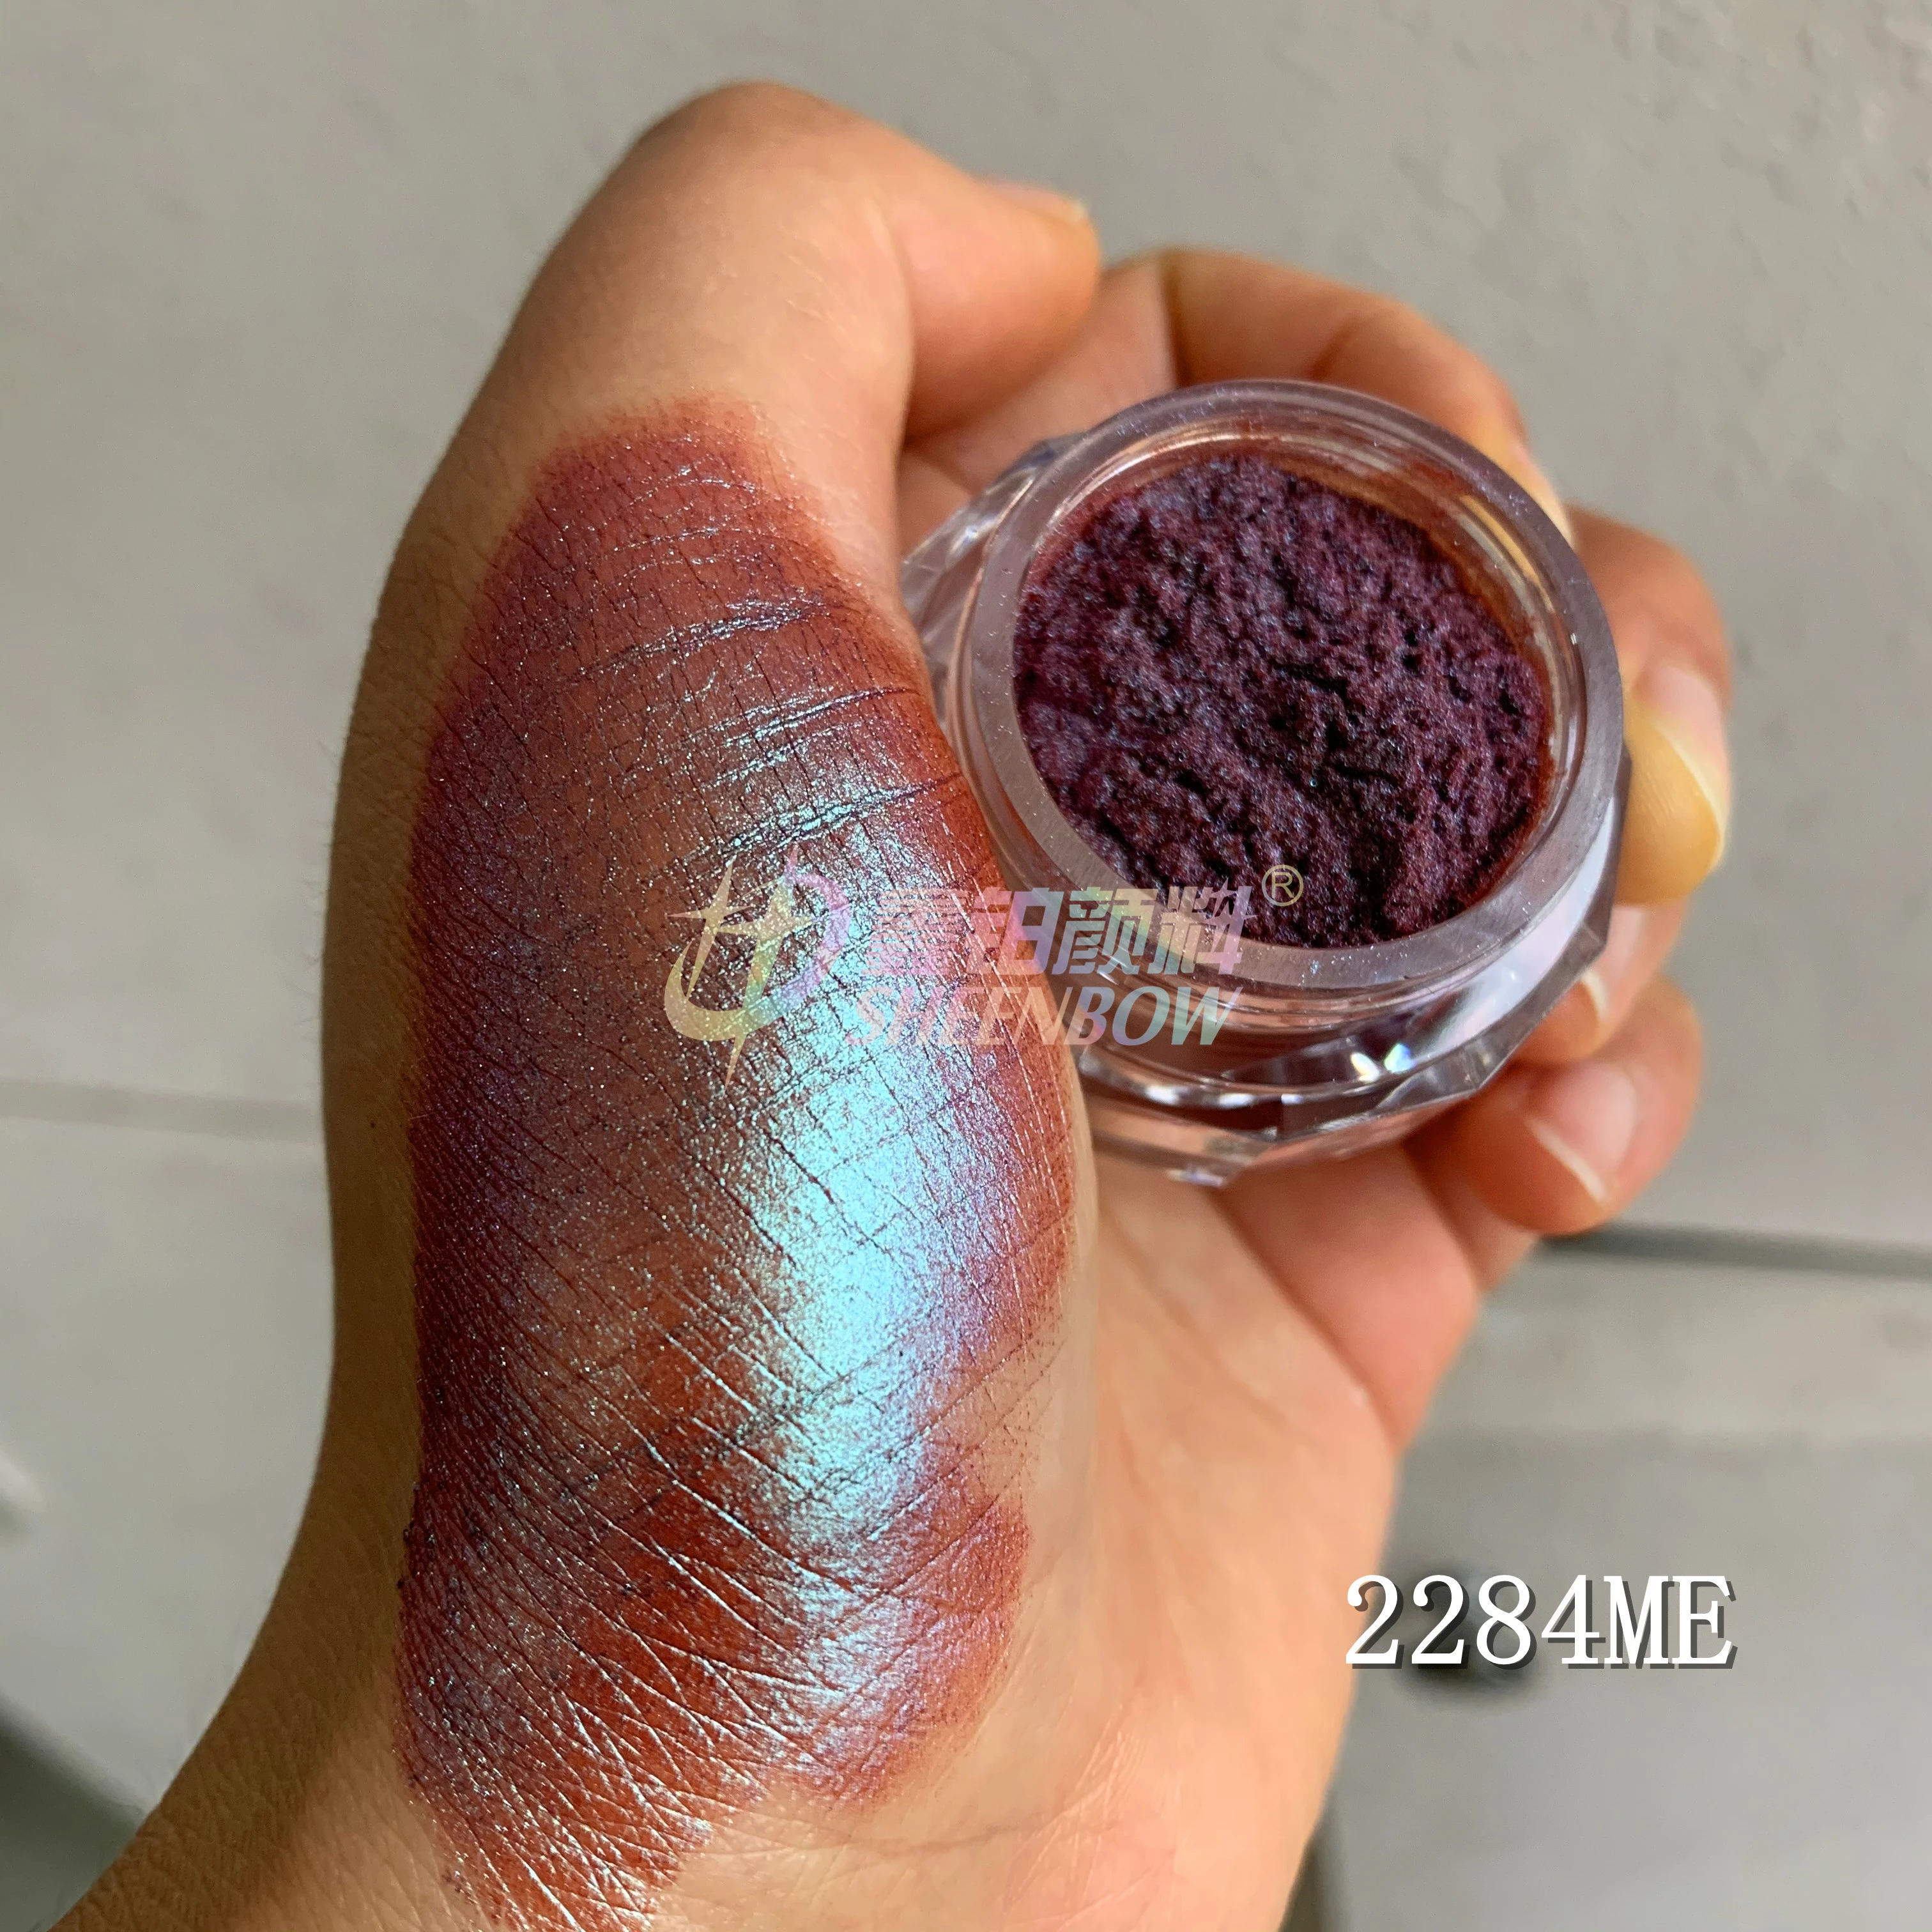 Sheenbow cosmetic grade pearlescent pigment mica powder